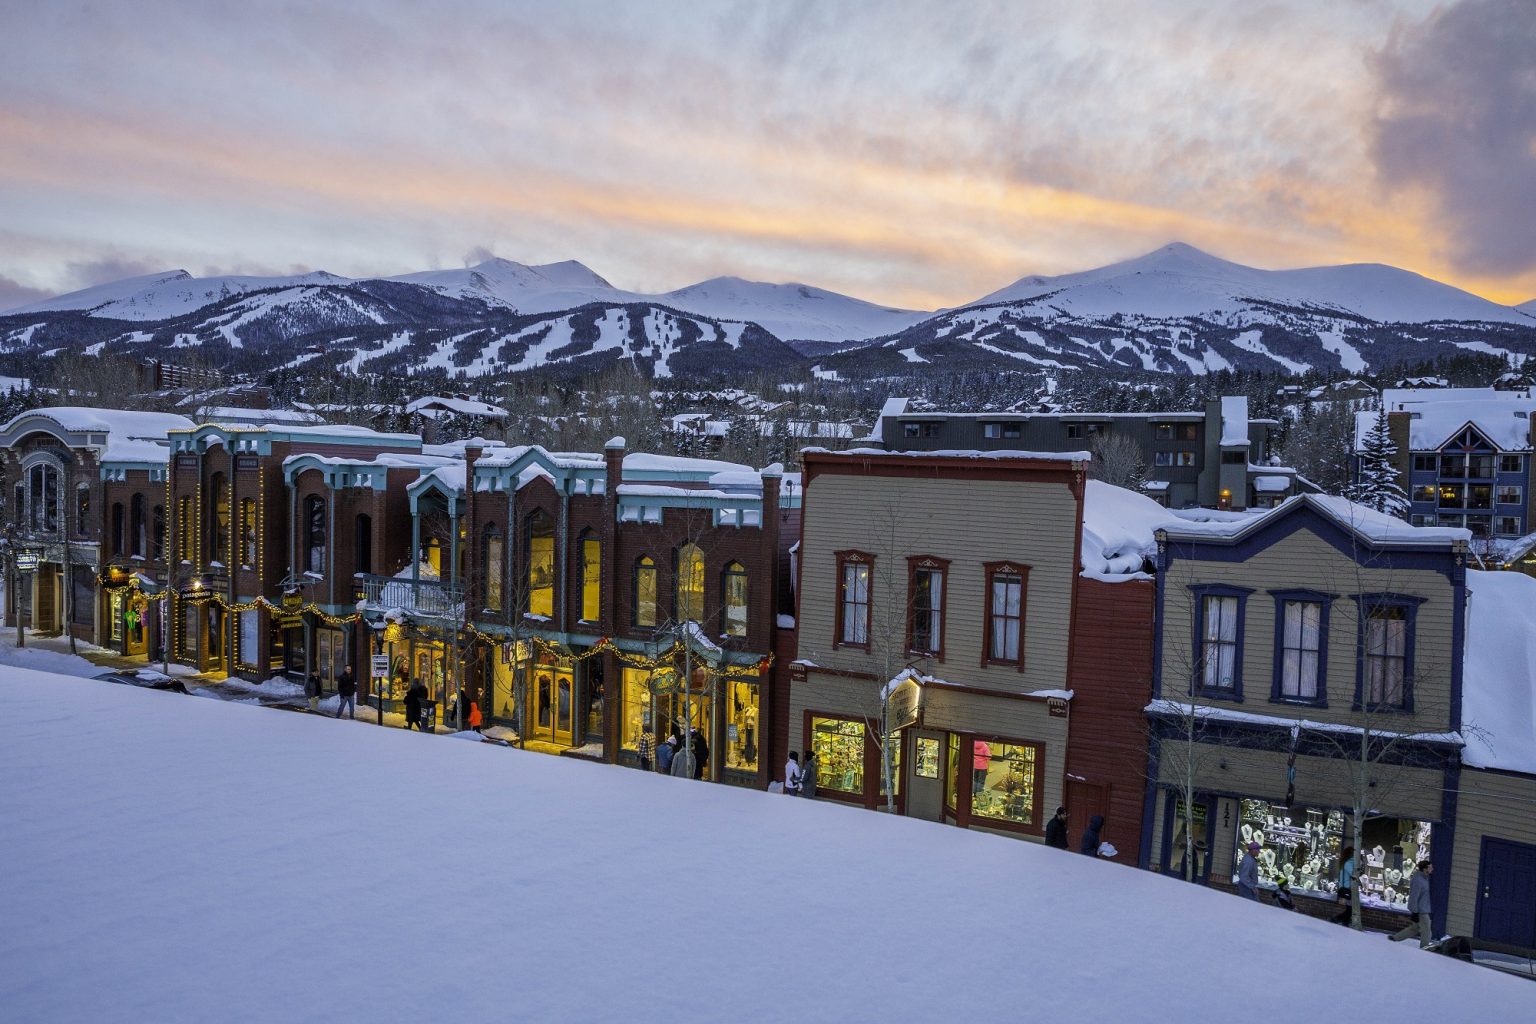 Downtown Breckenridge during the winter in the evening